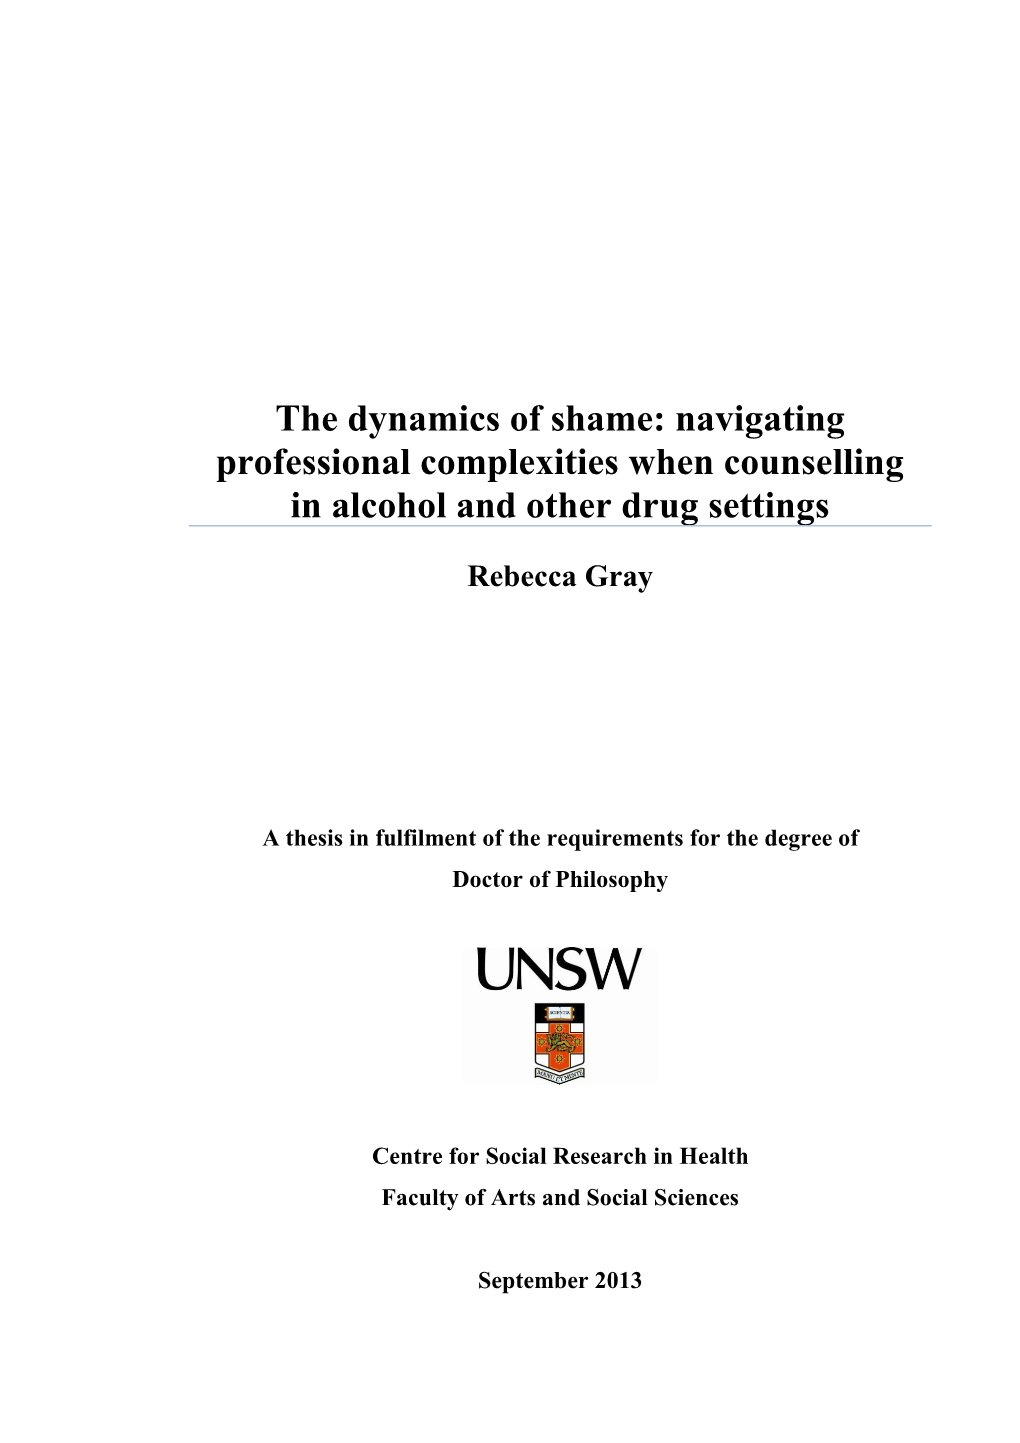 Navigating Professional Complexities When Counselling in Alcohol and Other Drug Settings